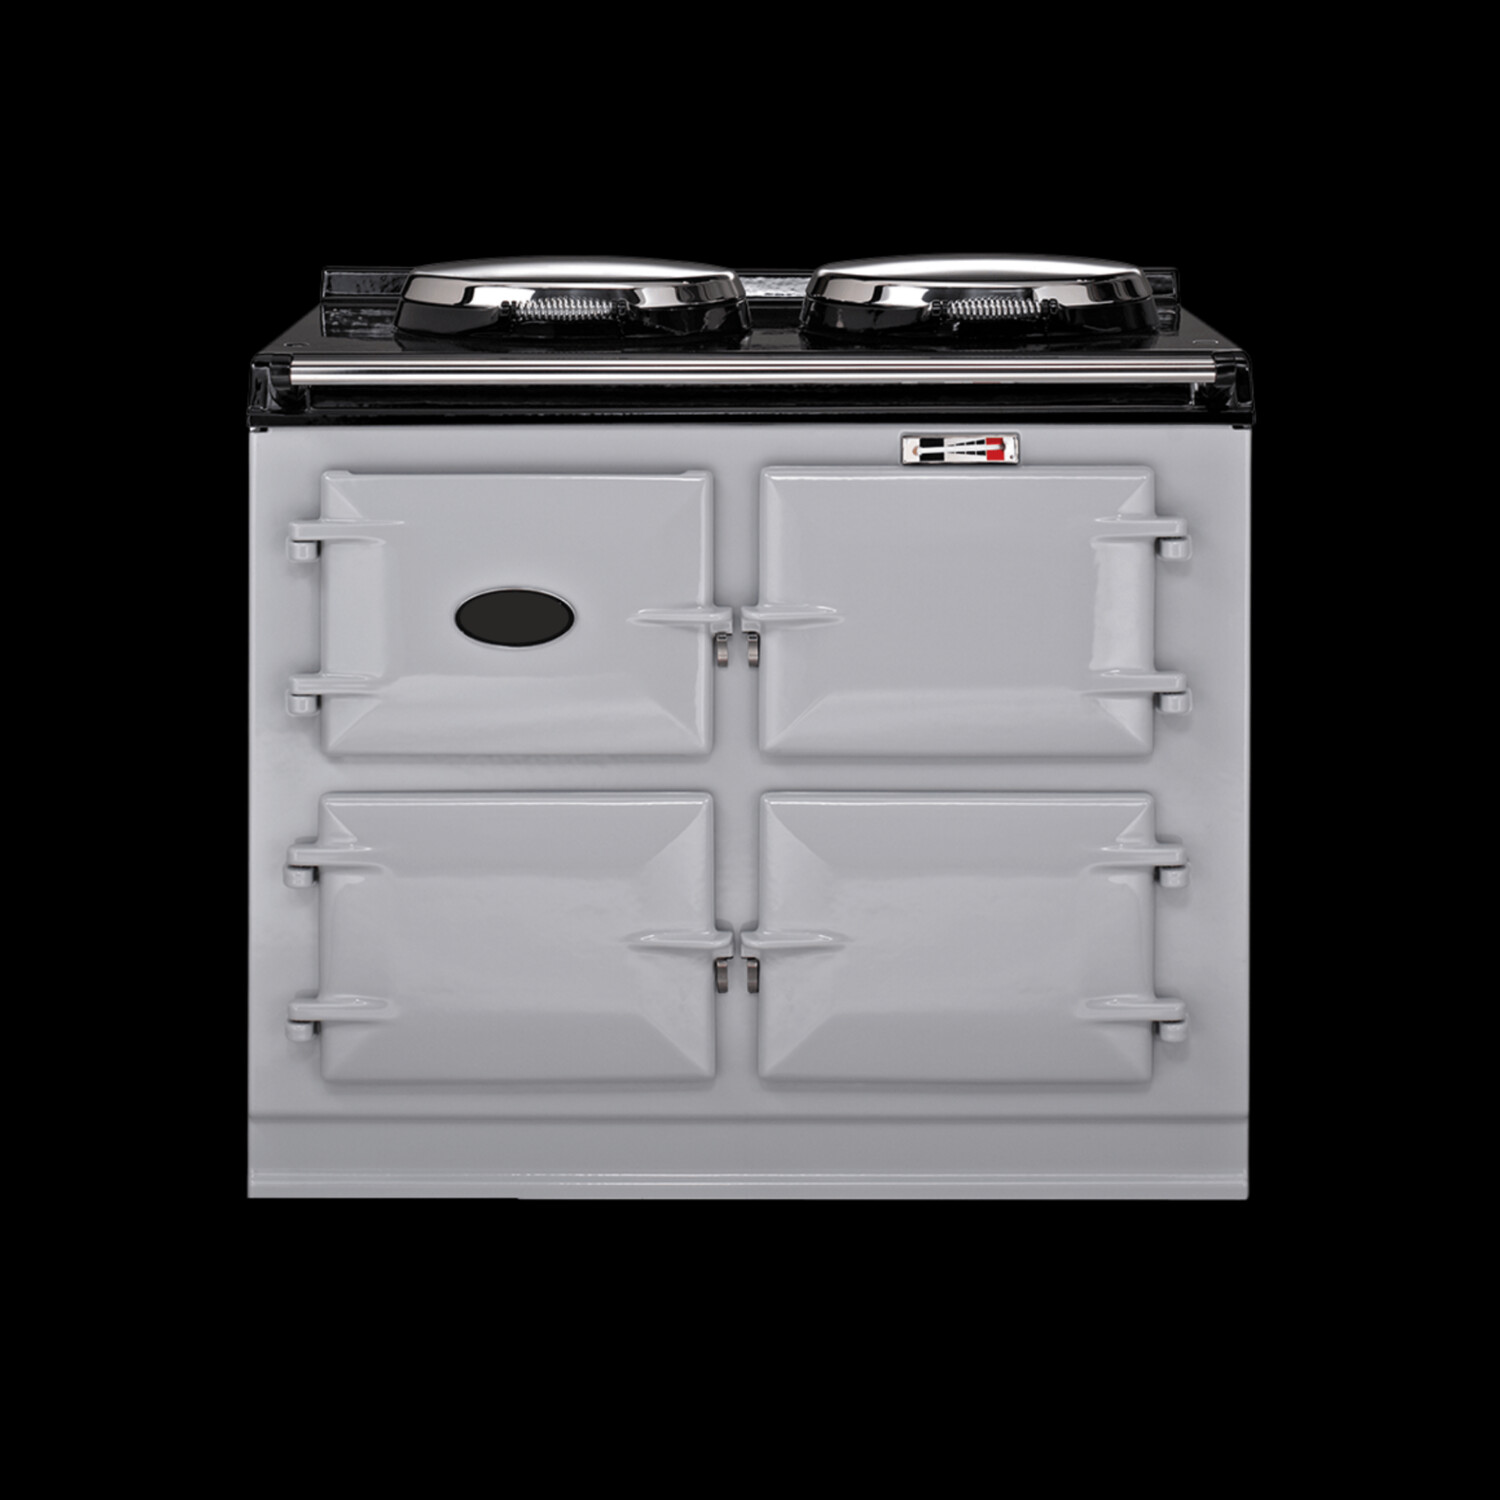 Reconditioned 3 Oven Gas Aga Cooker (Any Colour)